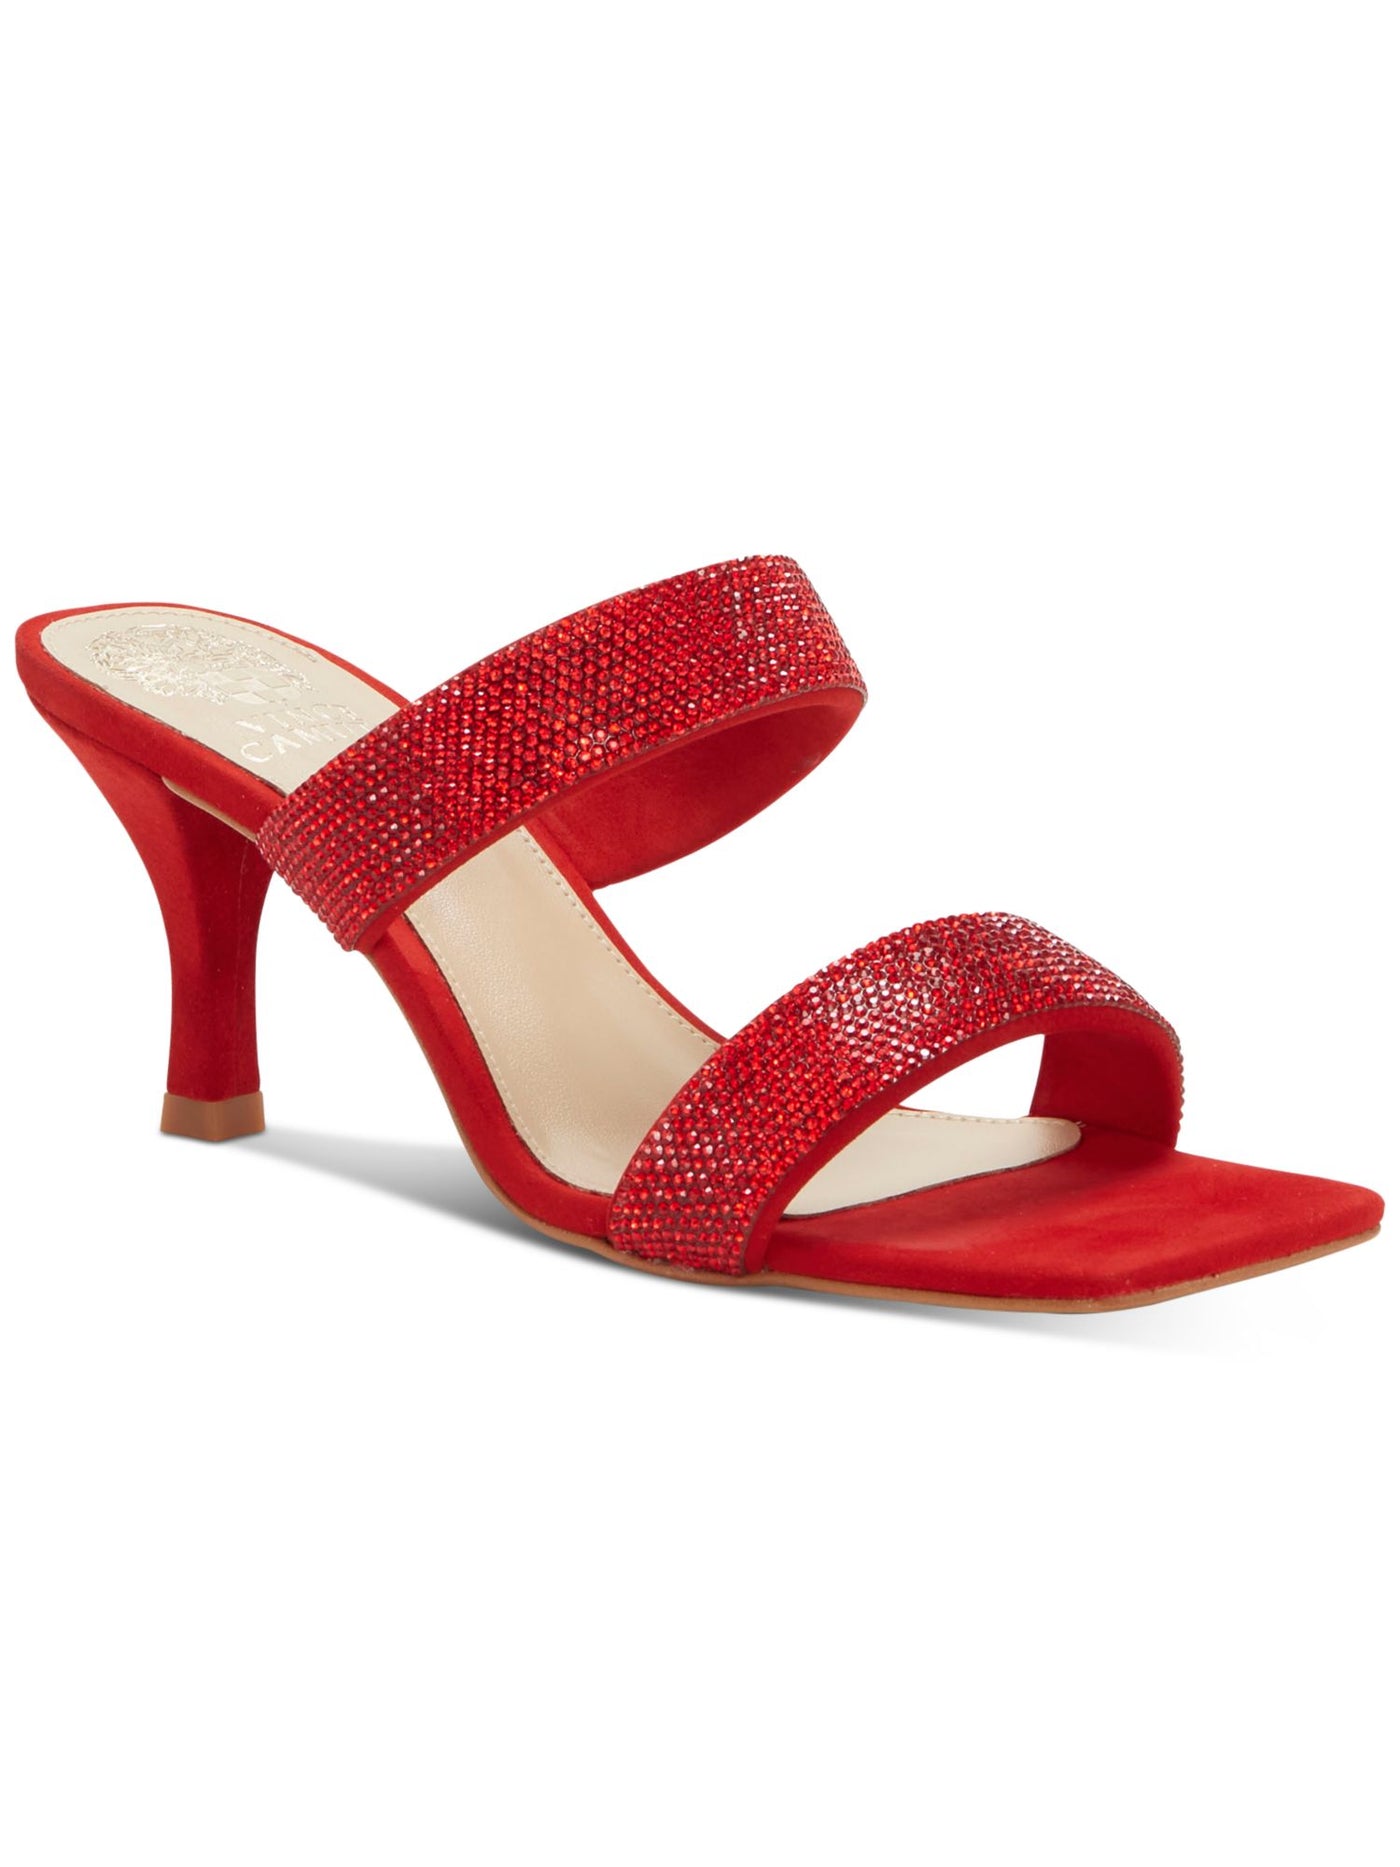 VINCE CAMUTO Womens Red Embellished Cushioned Aslee Square Toe Sculpted Heel Slip On Leather Dress Heeled Sandal 5.5 M